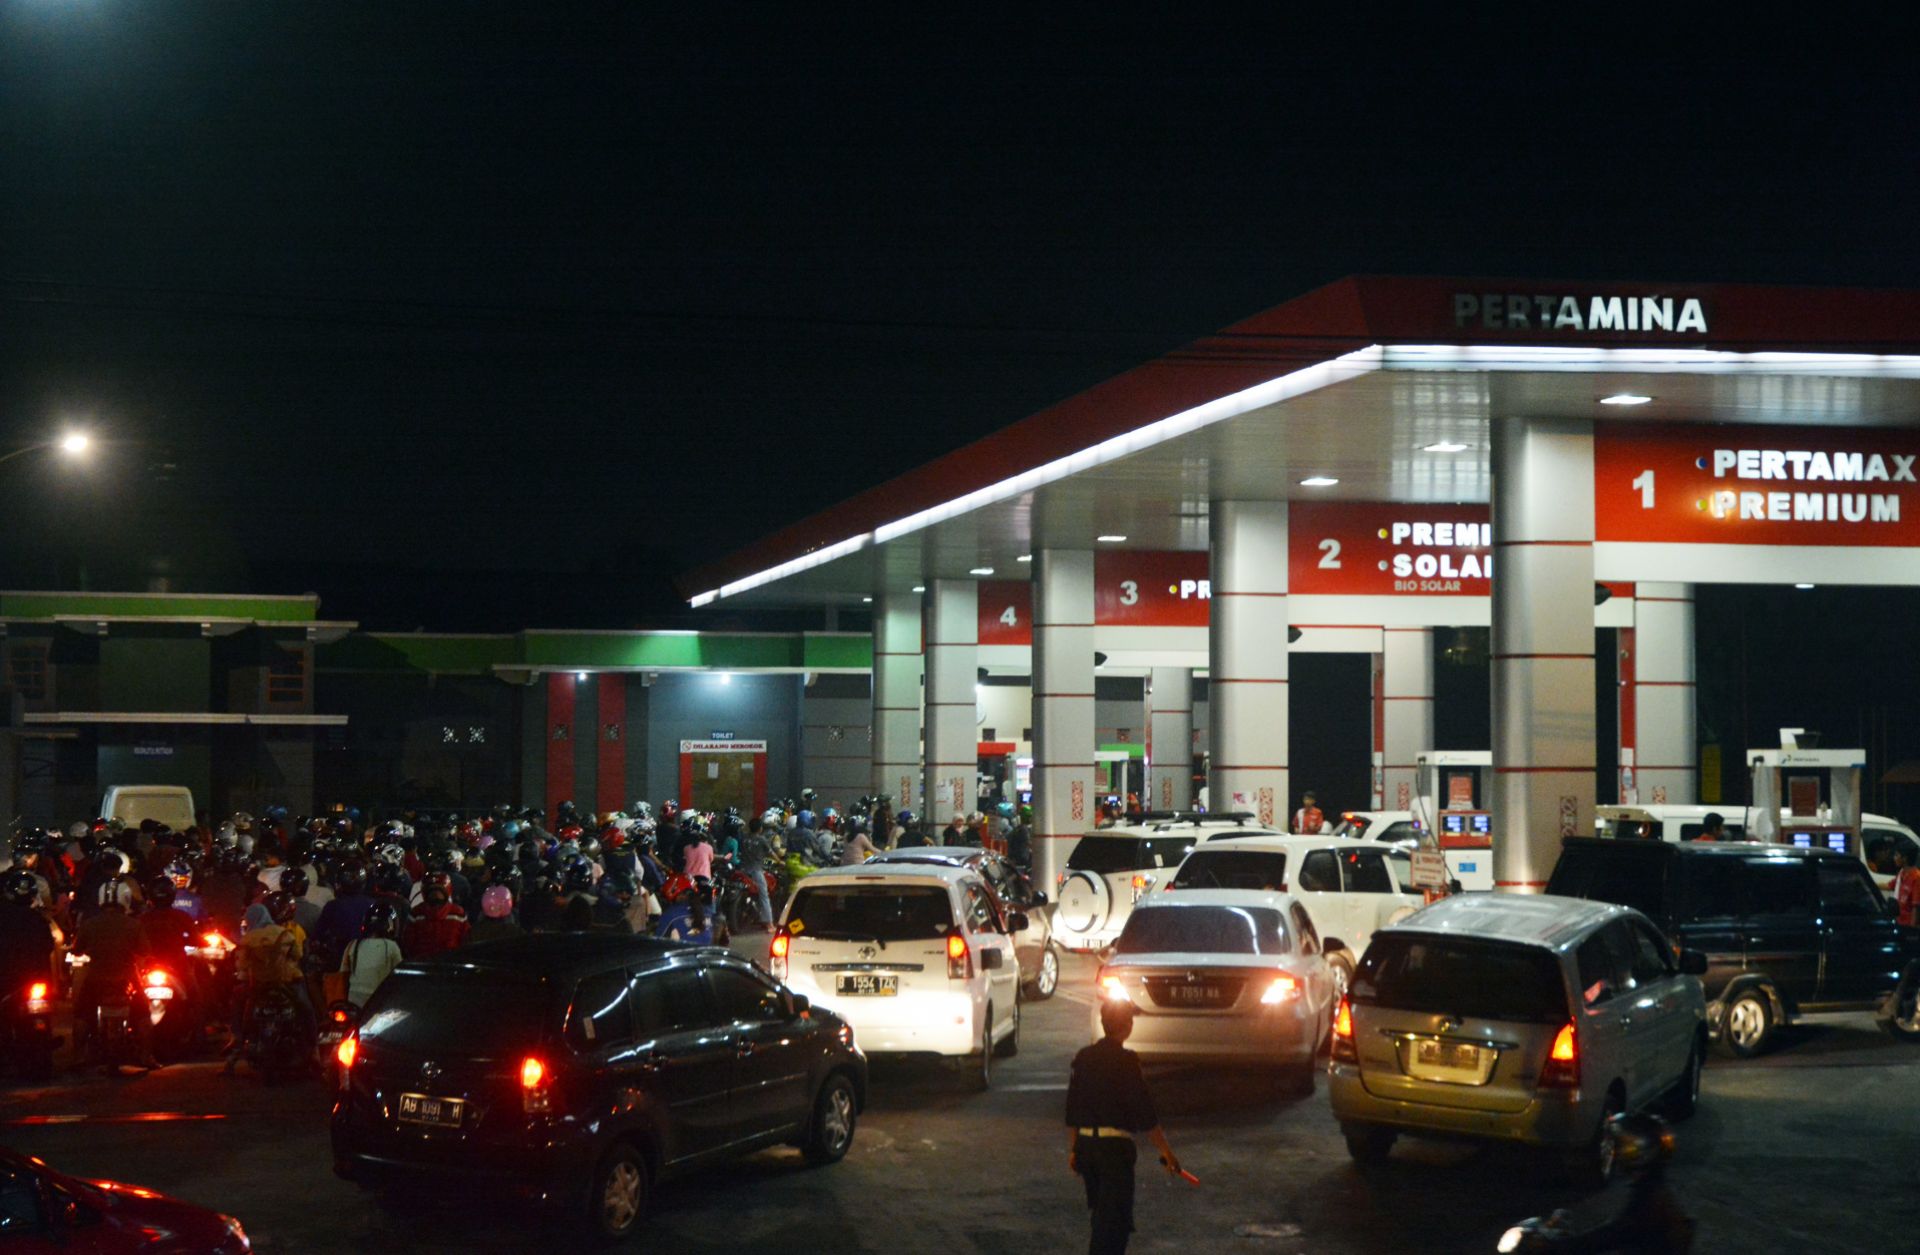 Cars and motorcycles line up at a fuel station in Purwokerto, on the island of Java, Indonesia, on Nov. 17, 2014.